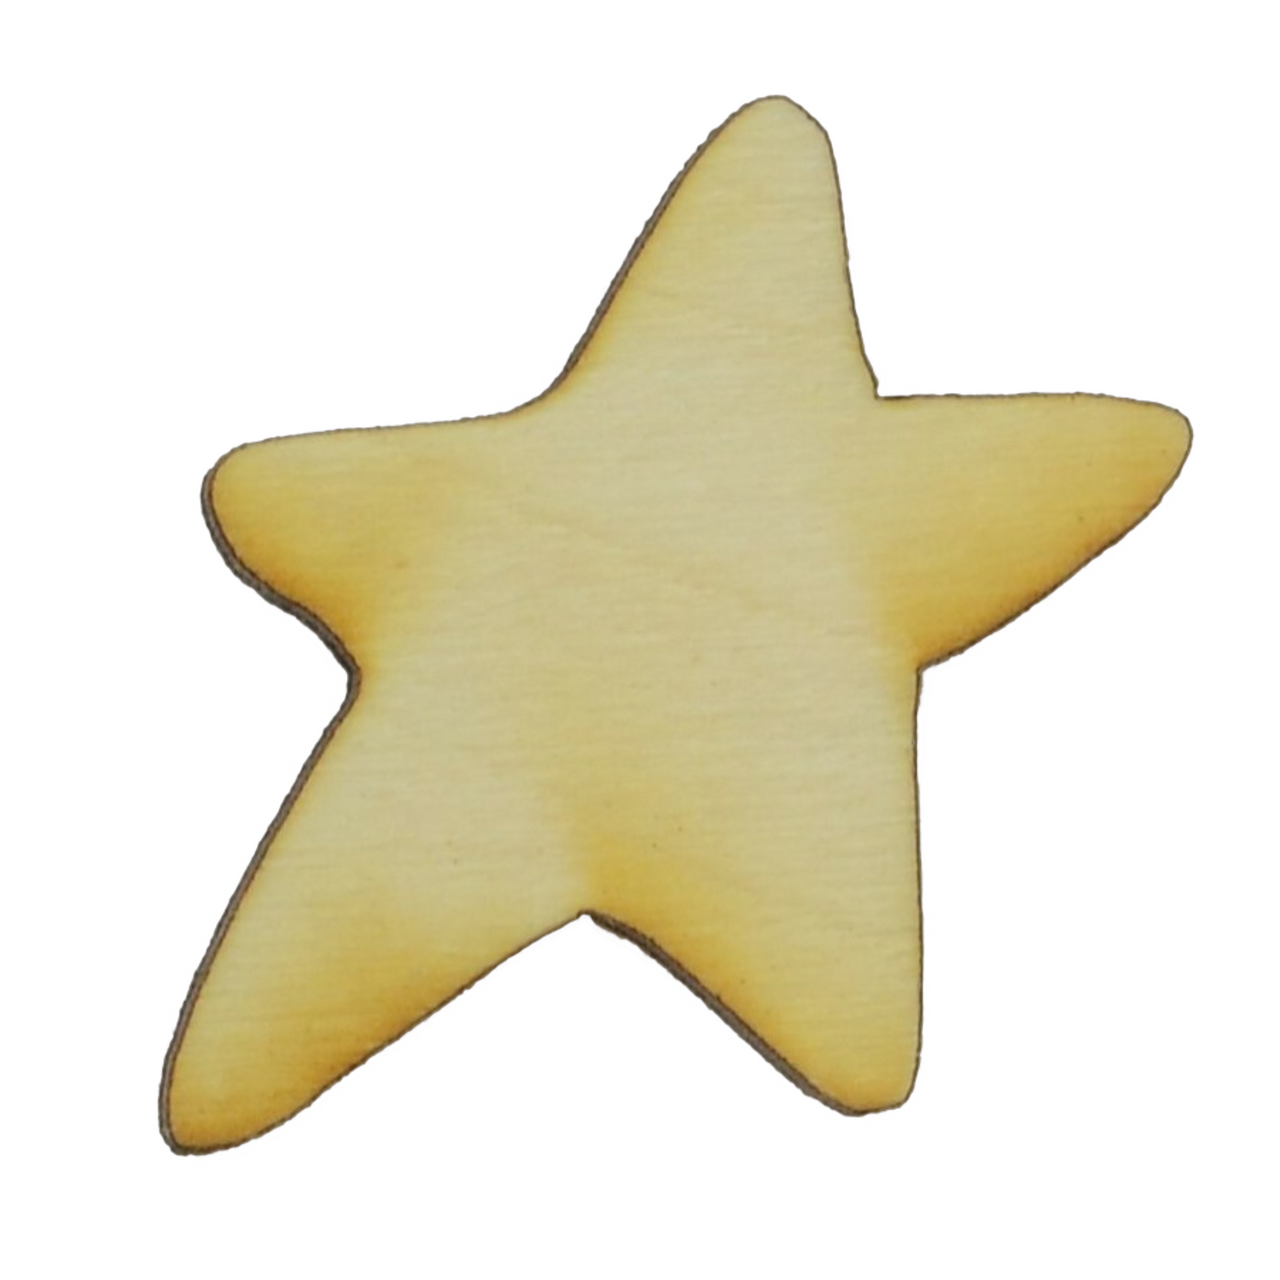 Primitive Star 1 x 1, 1/8 Thick / Package of 10